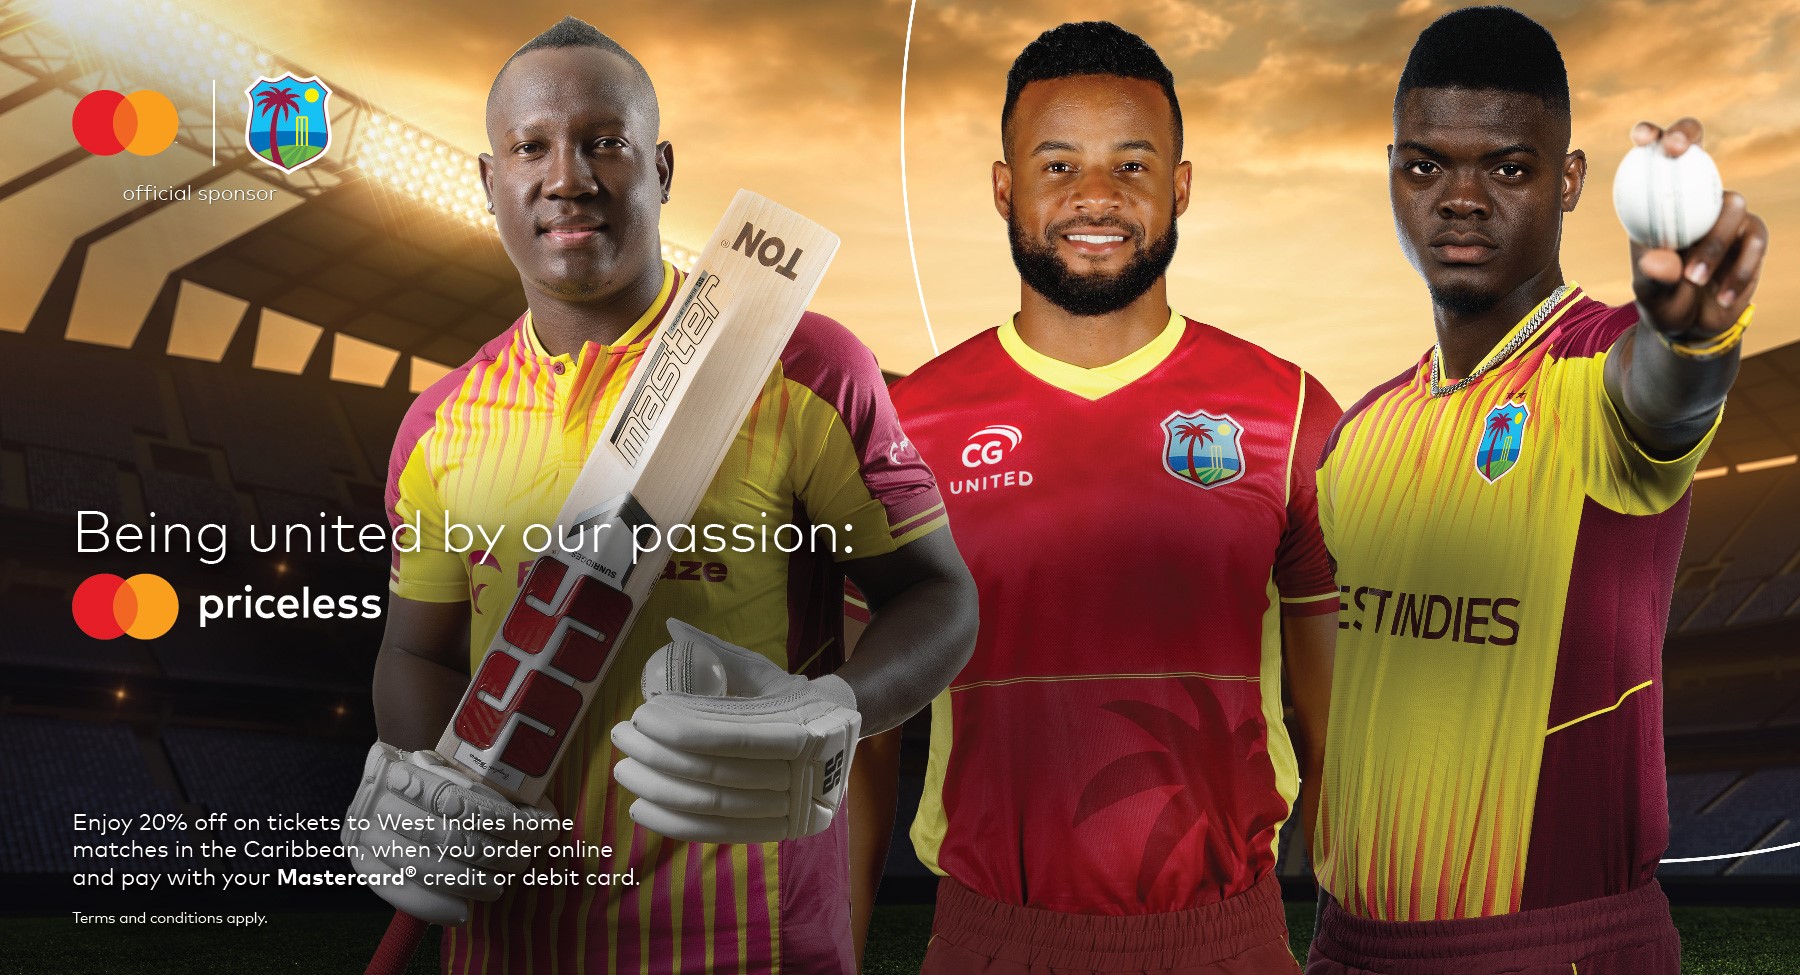 Mastercard brings new fan benefits as the official sponsor of the Cricket West Indies Mastercard Newsroom